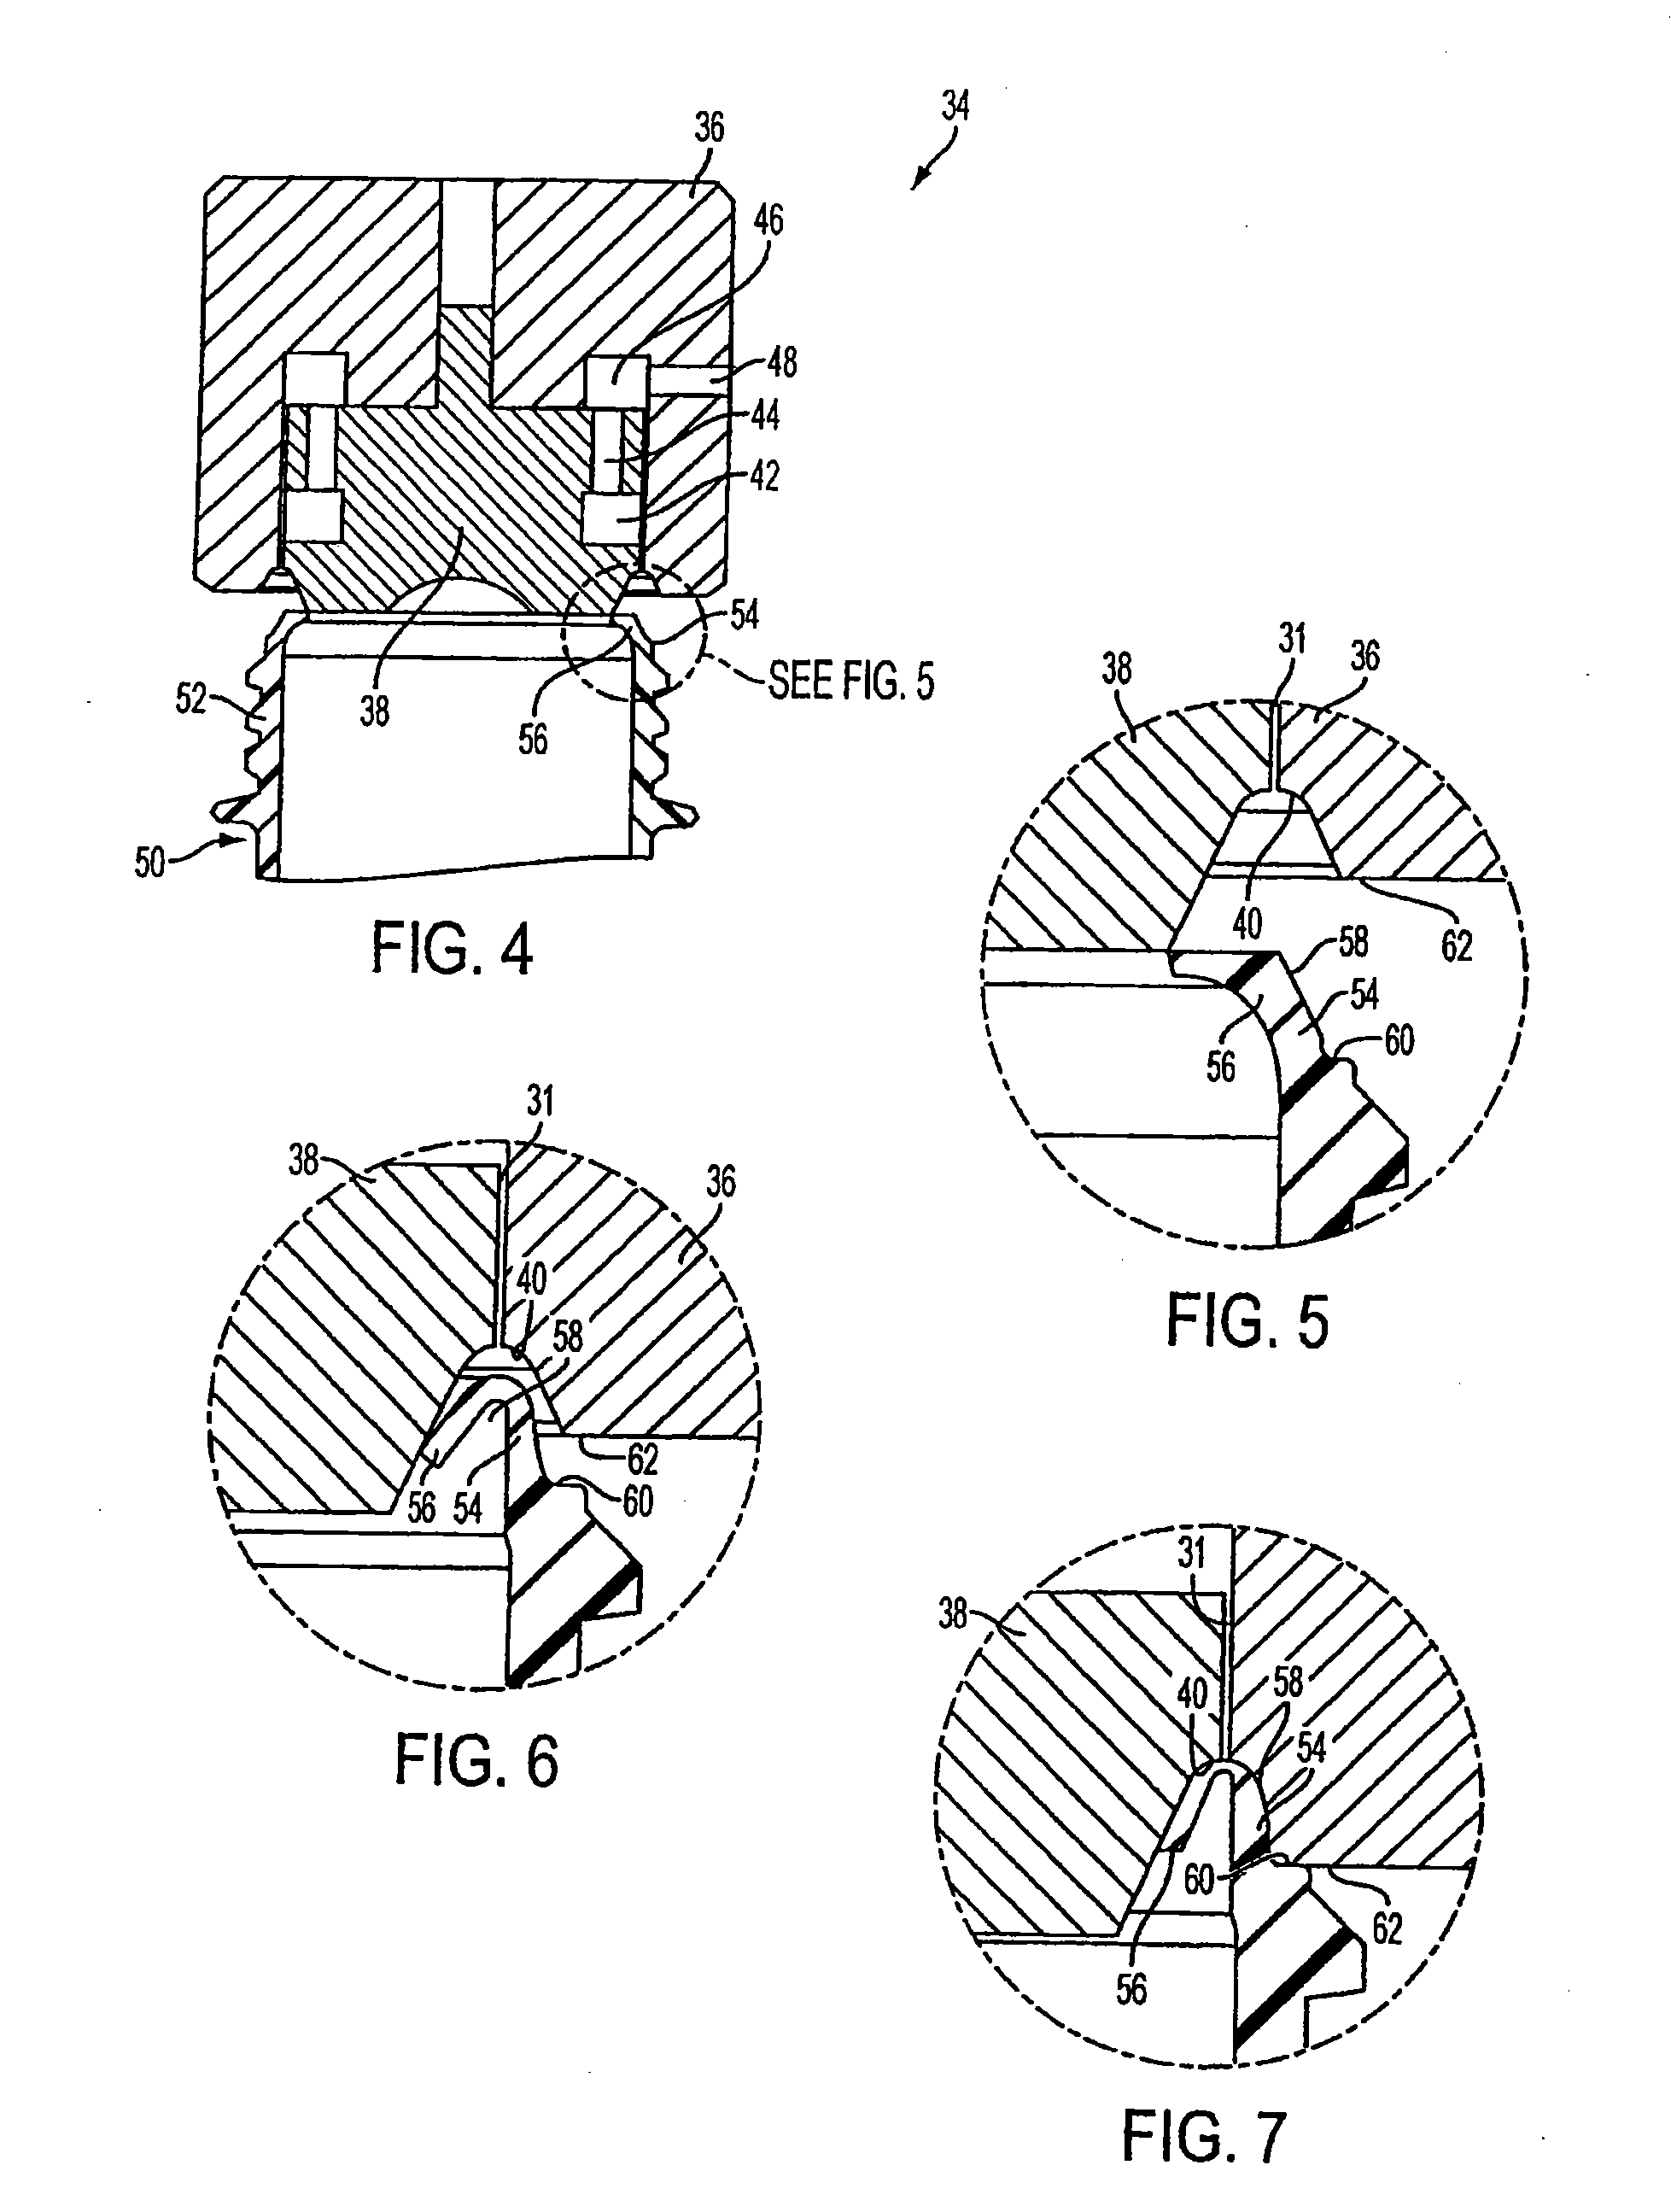 Method for reforming a portion of a plastic container to include a transferable element, and the resulting container